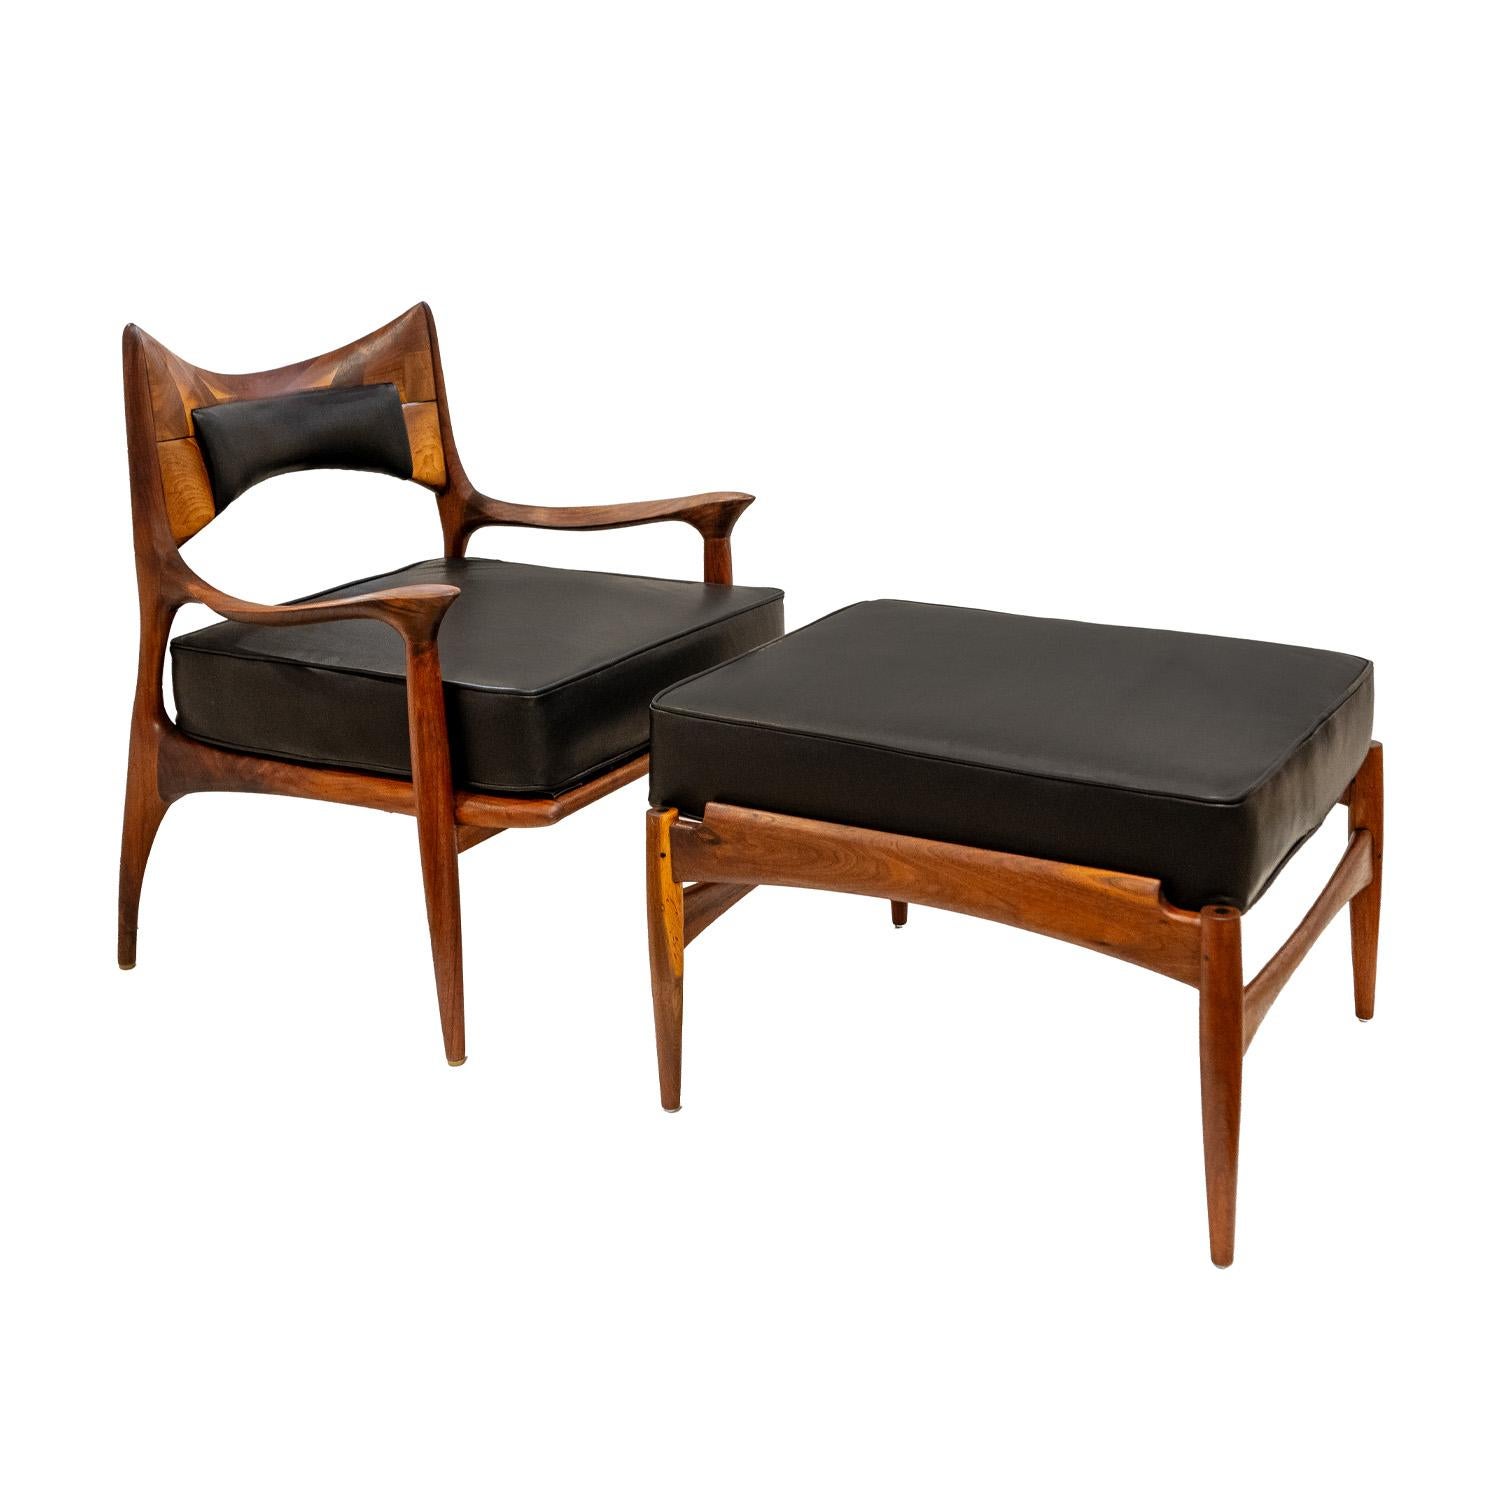 Iconic and rare chair and ottoman in sculpted walnut with black leather seat and inset leather backrest by Phillip Lloyd Powell, American early-1960s.  The craftsmanship of this chair and ottoman is superb.  Newly refinished and reupholstered in